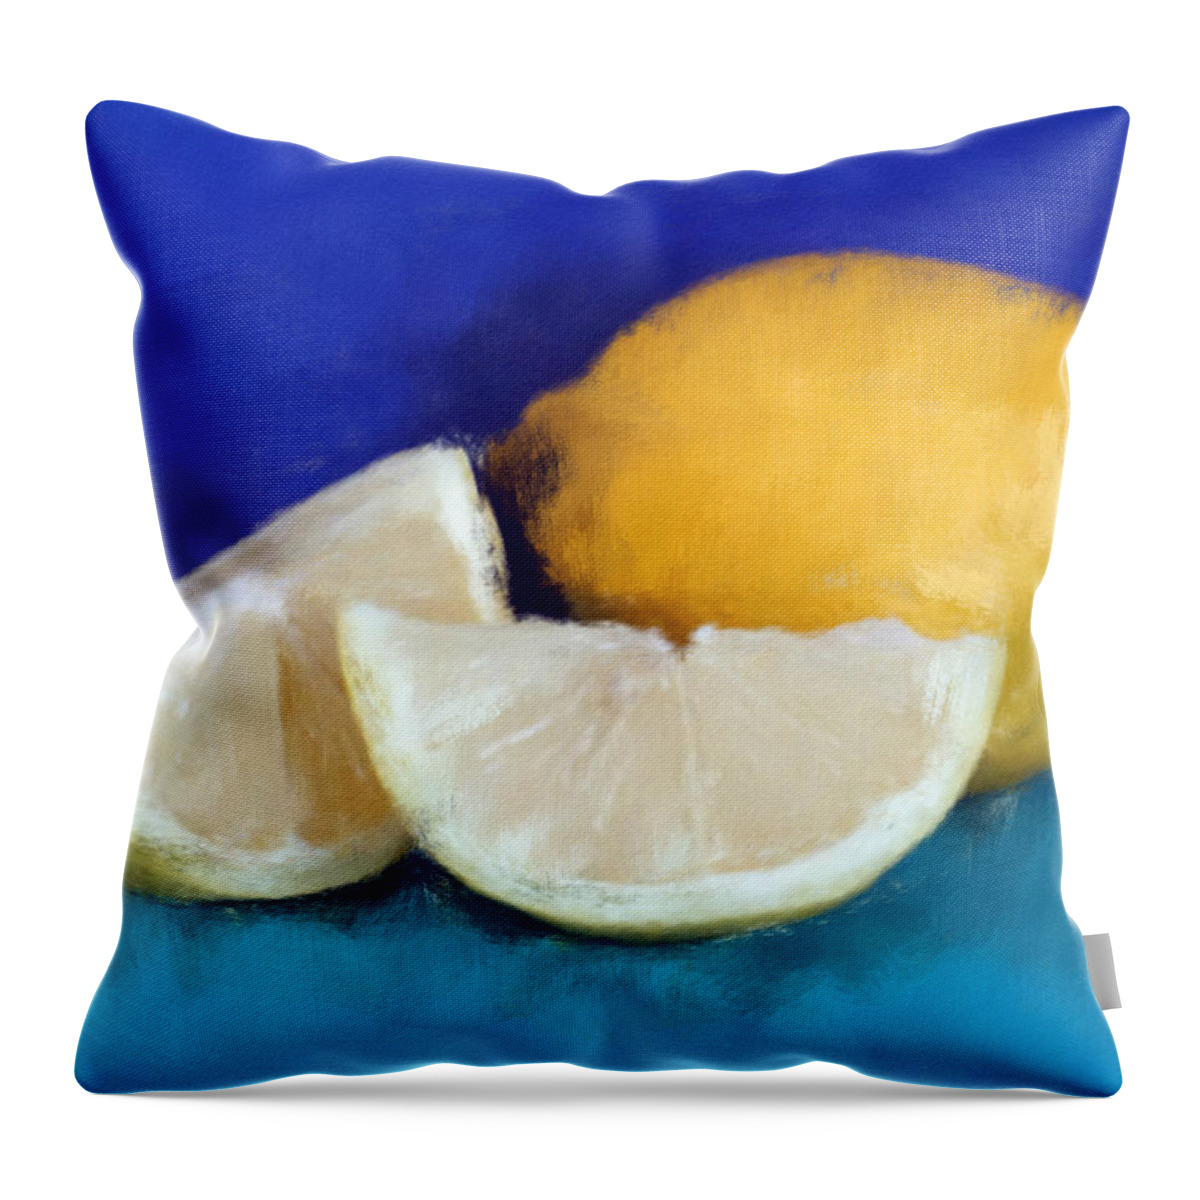 Fruit Throw Pillow featuring the painting Fresh Lemons- Colorful Art by Linda Woods by Linda Woods